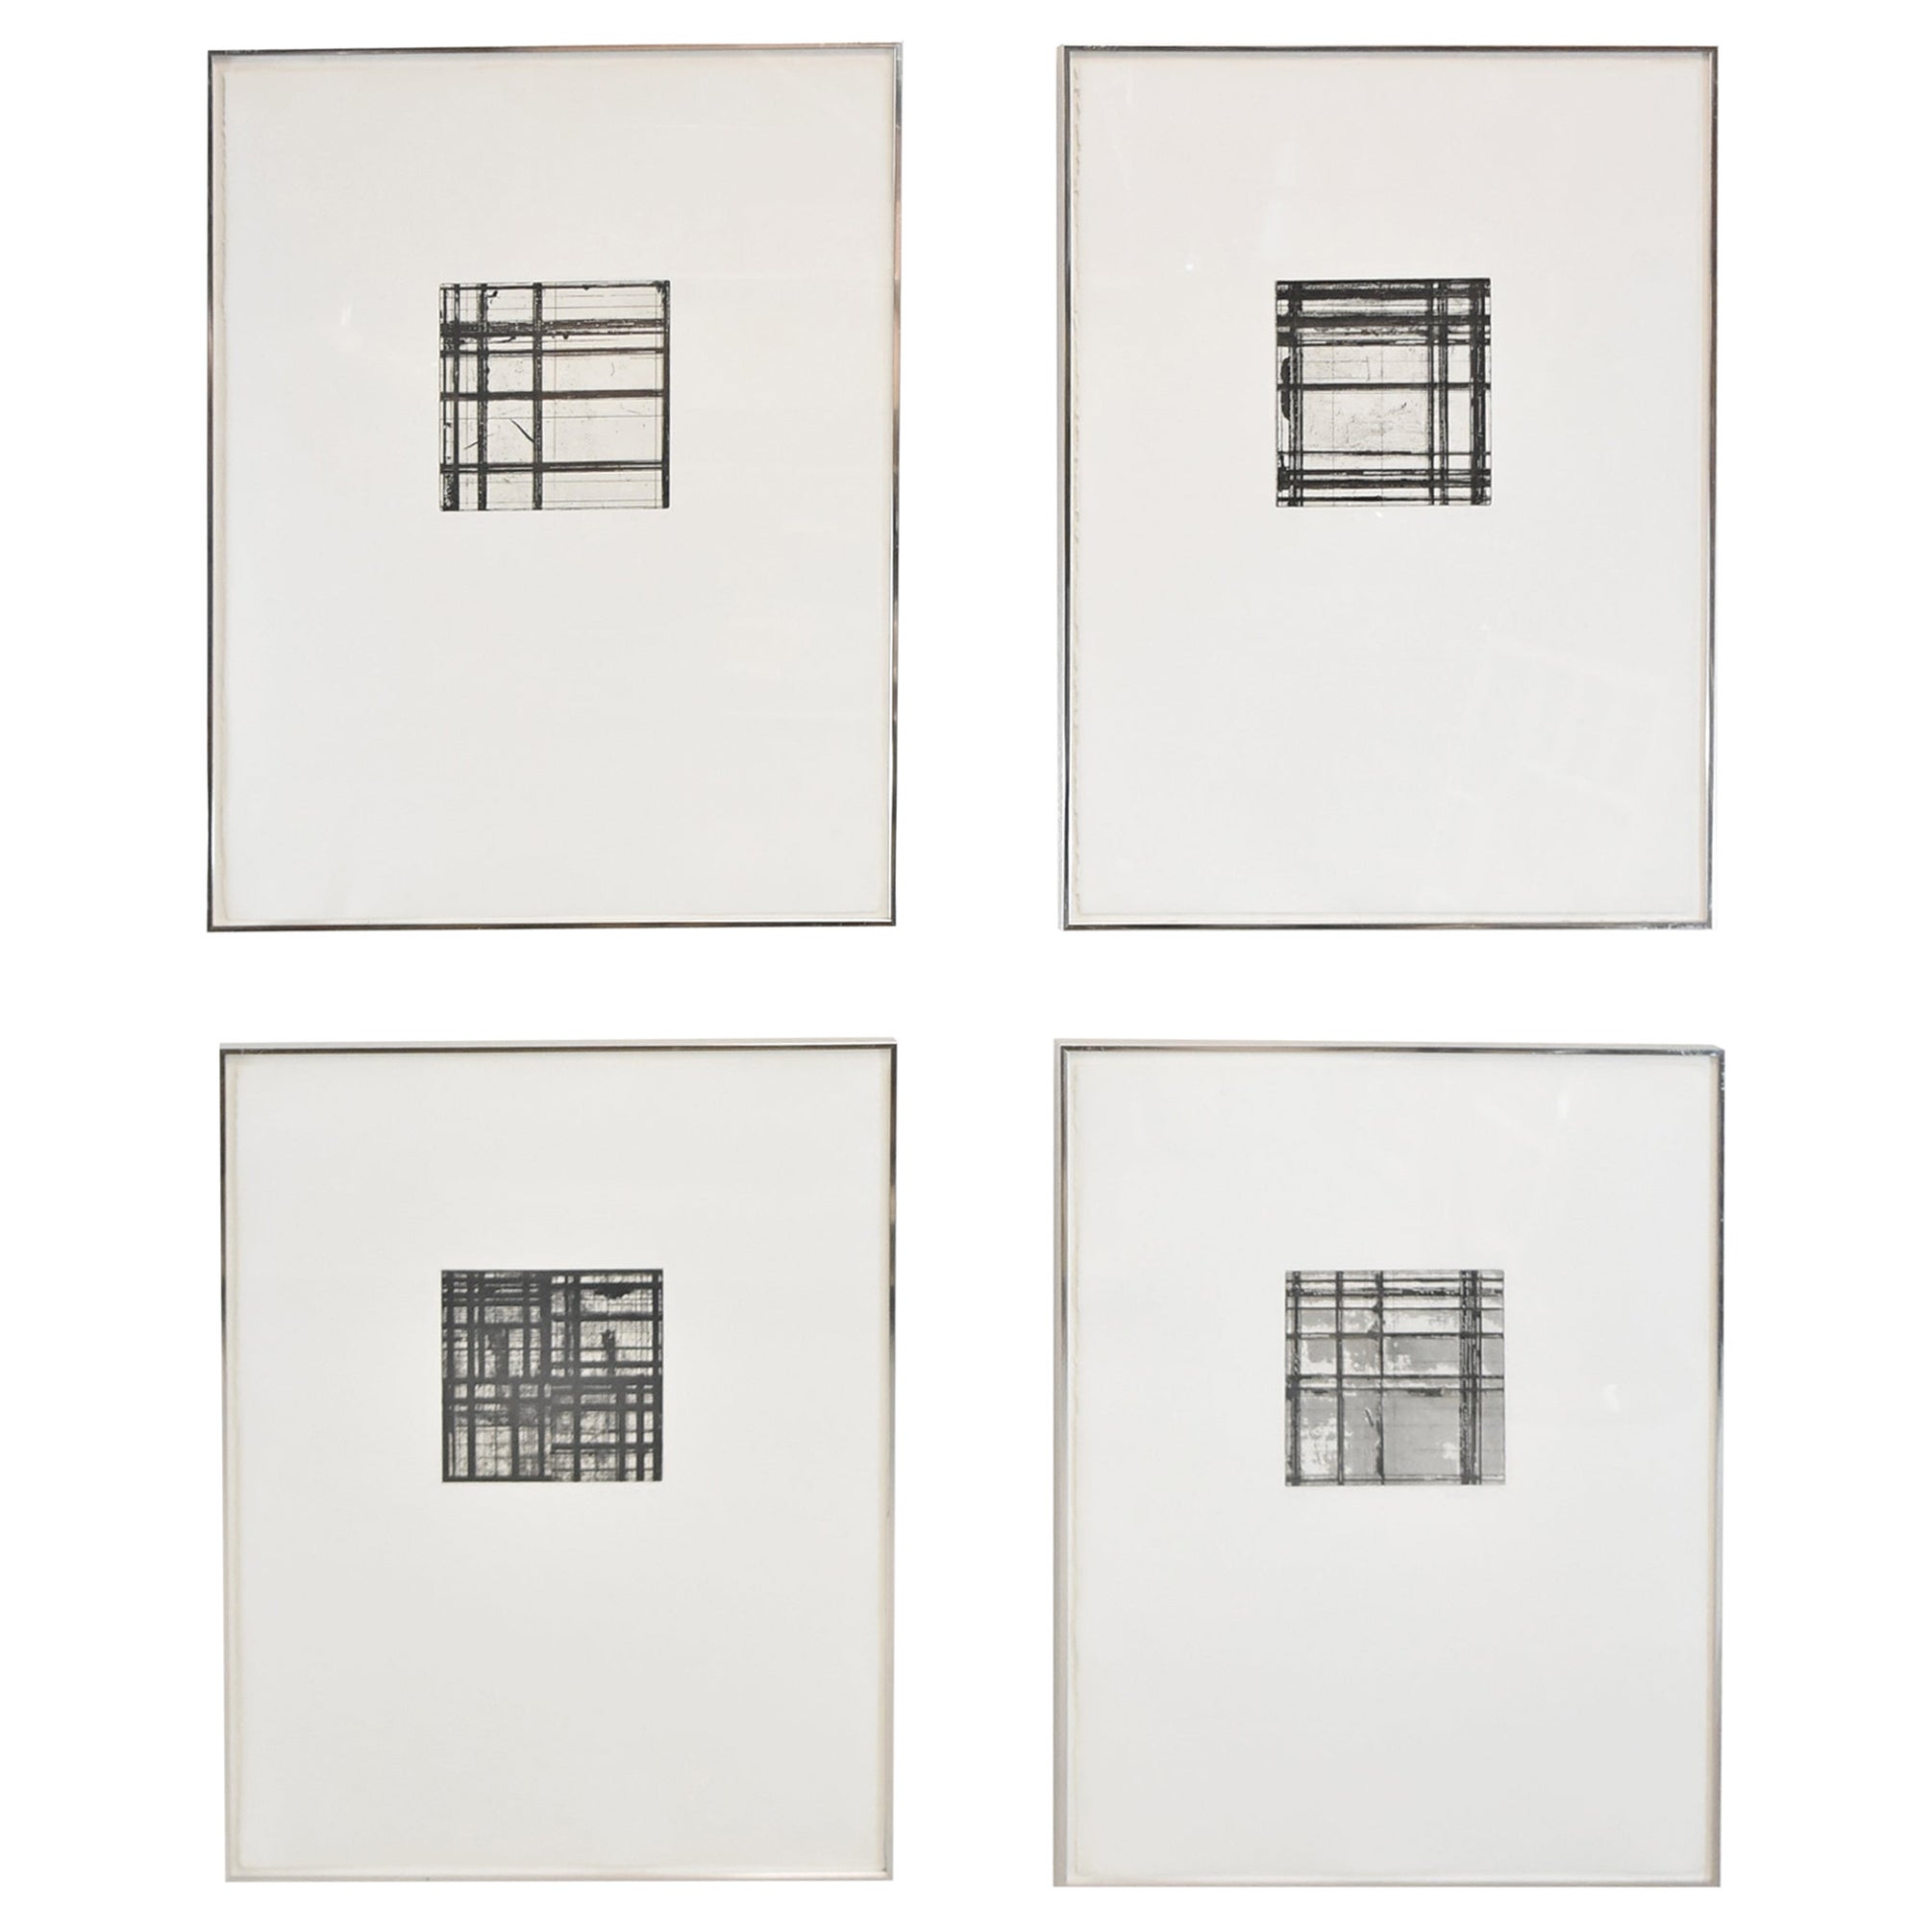 Brice Marden Set of 4 Etching Tiles, 1979 For Sale